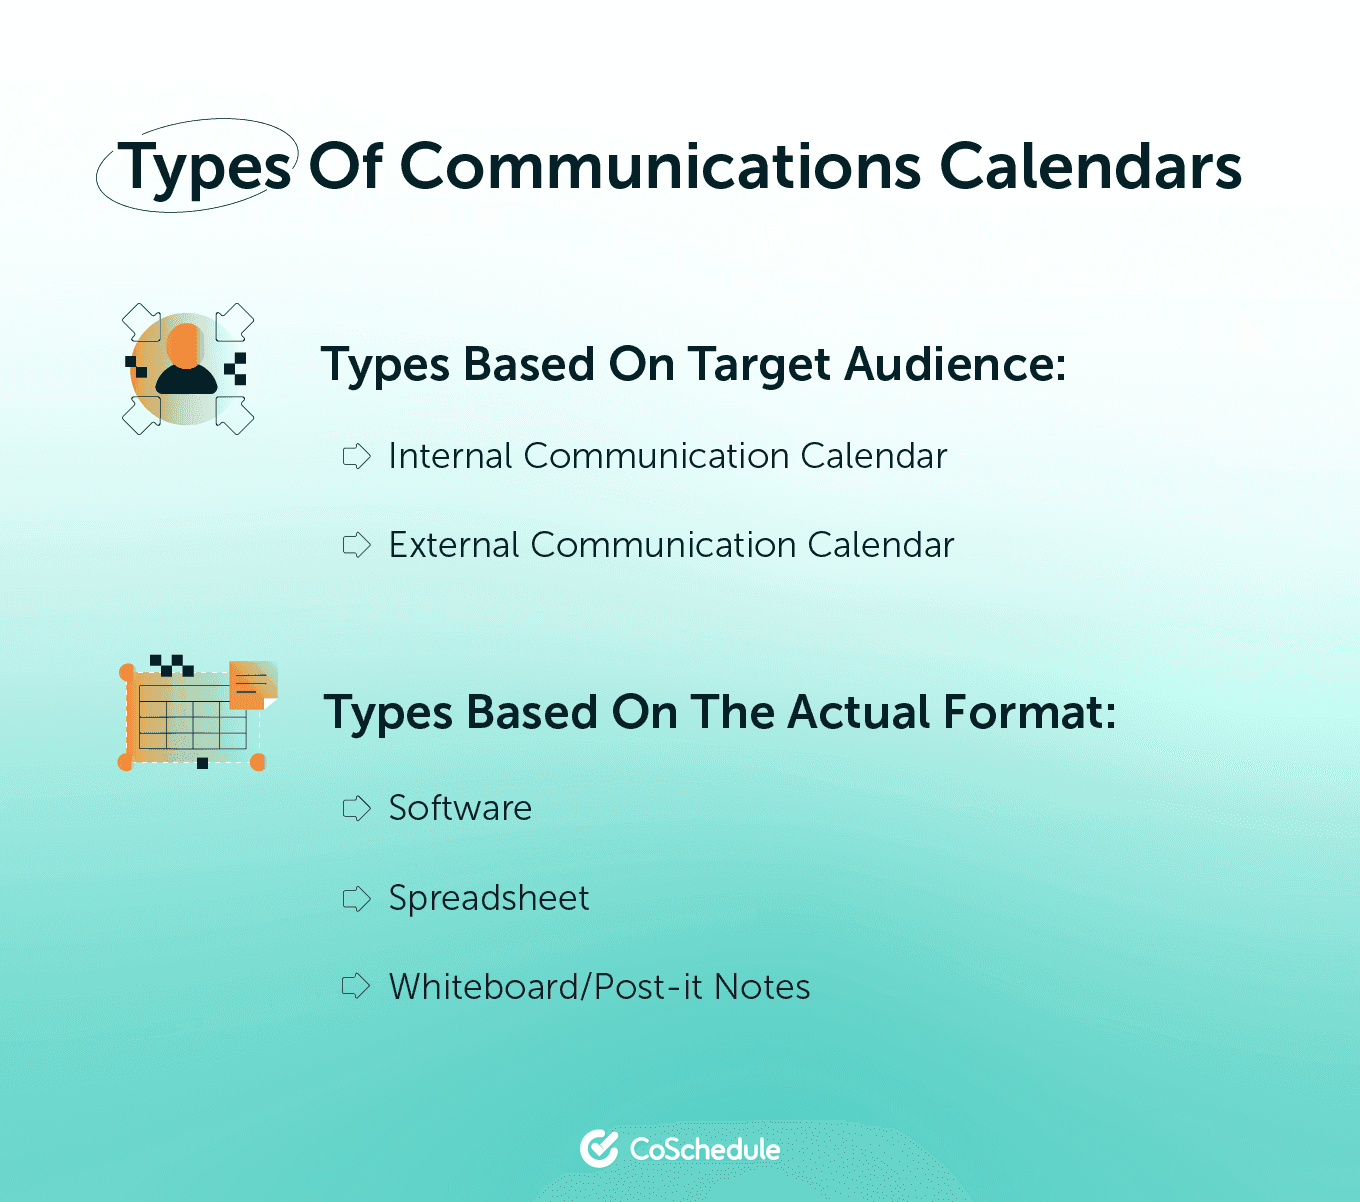 How To Create A Communications Calendar In 7 Easy Steps [Template Included]